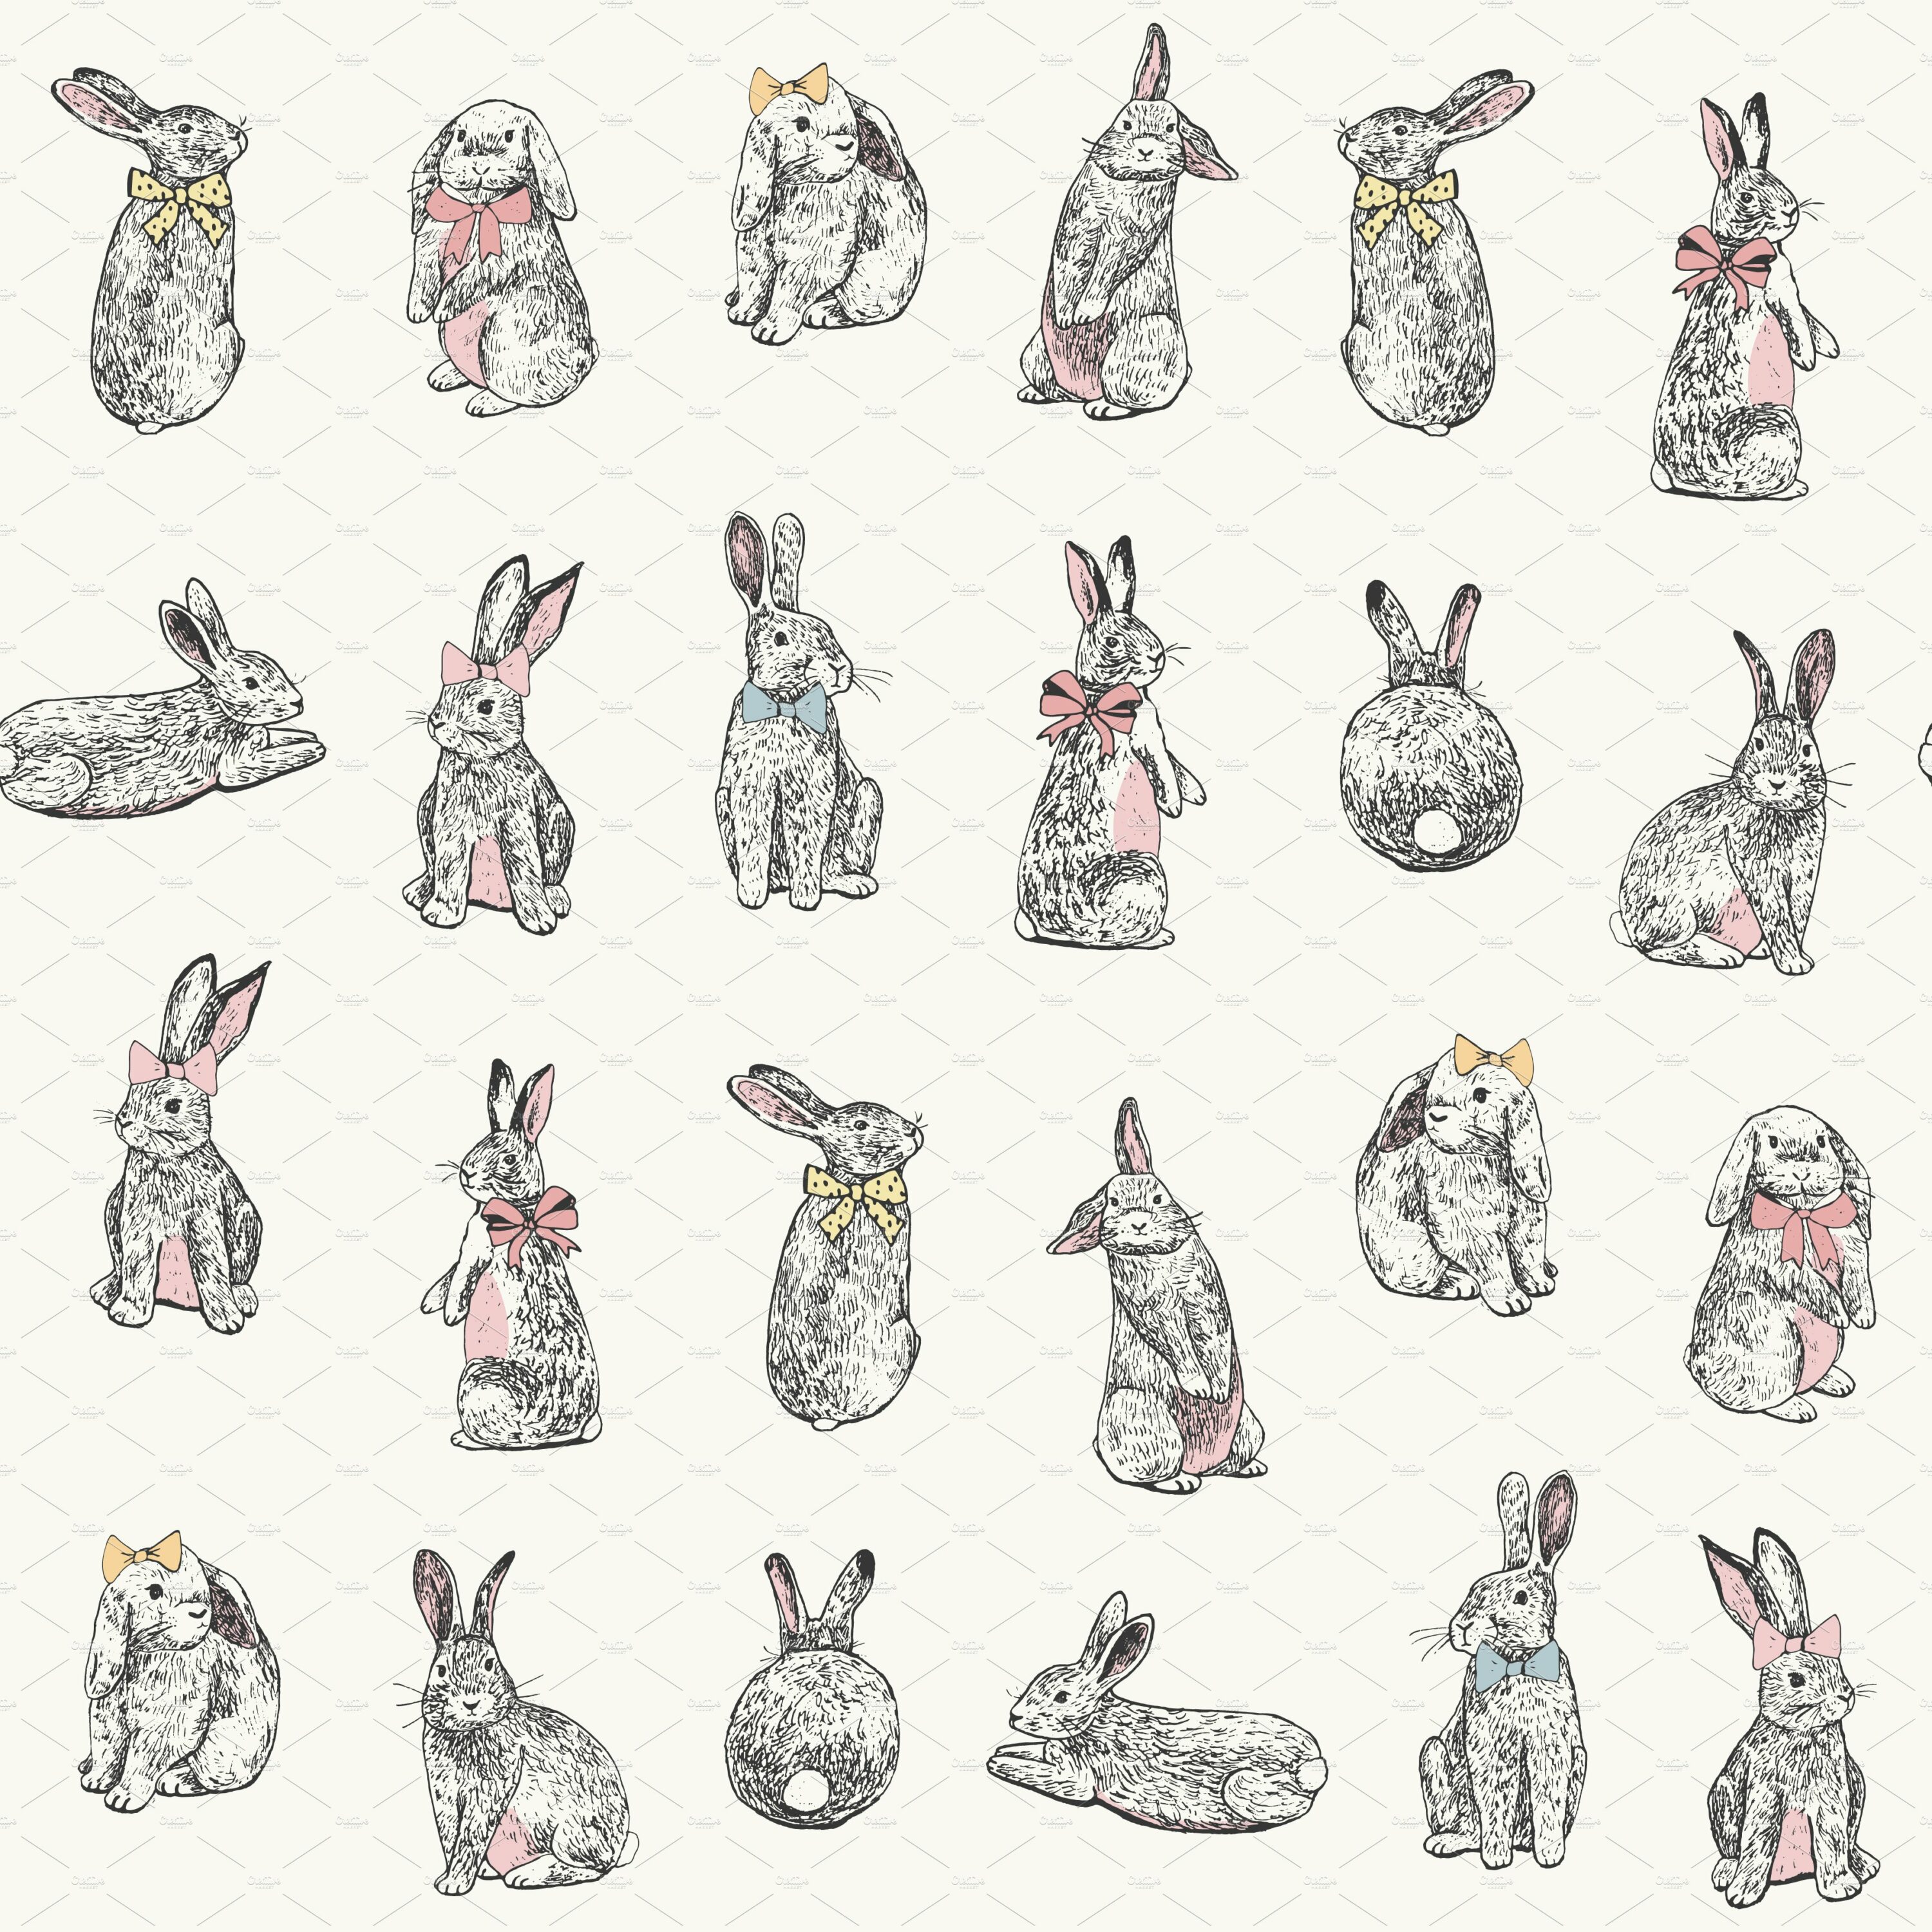 Festive rabbits in the different mood.